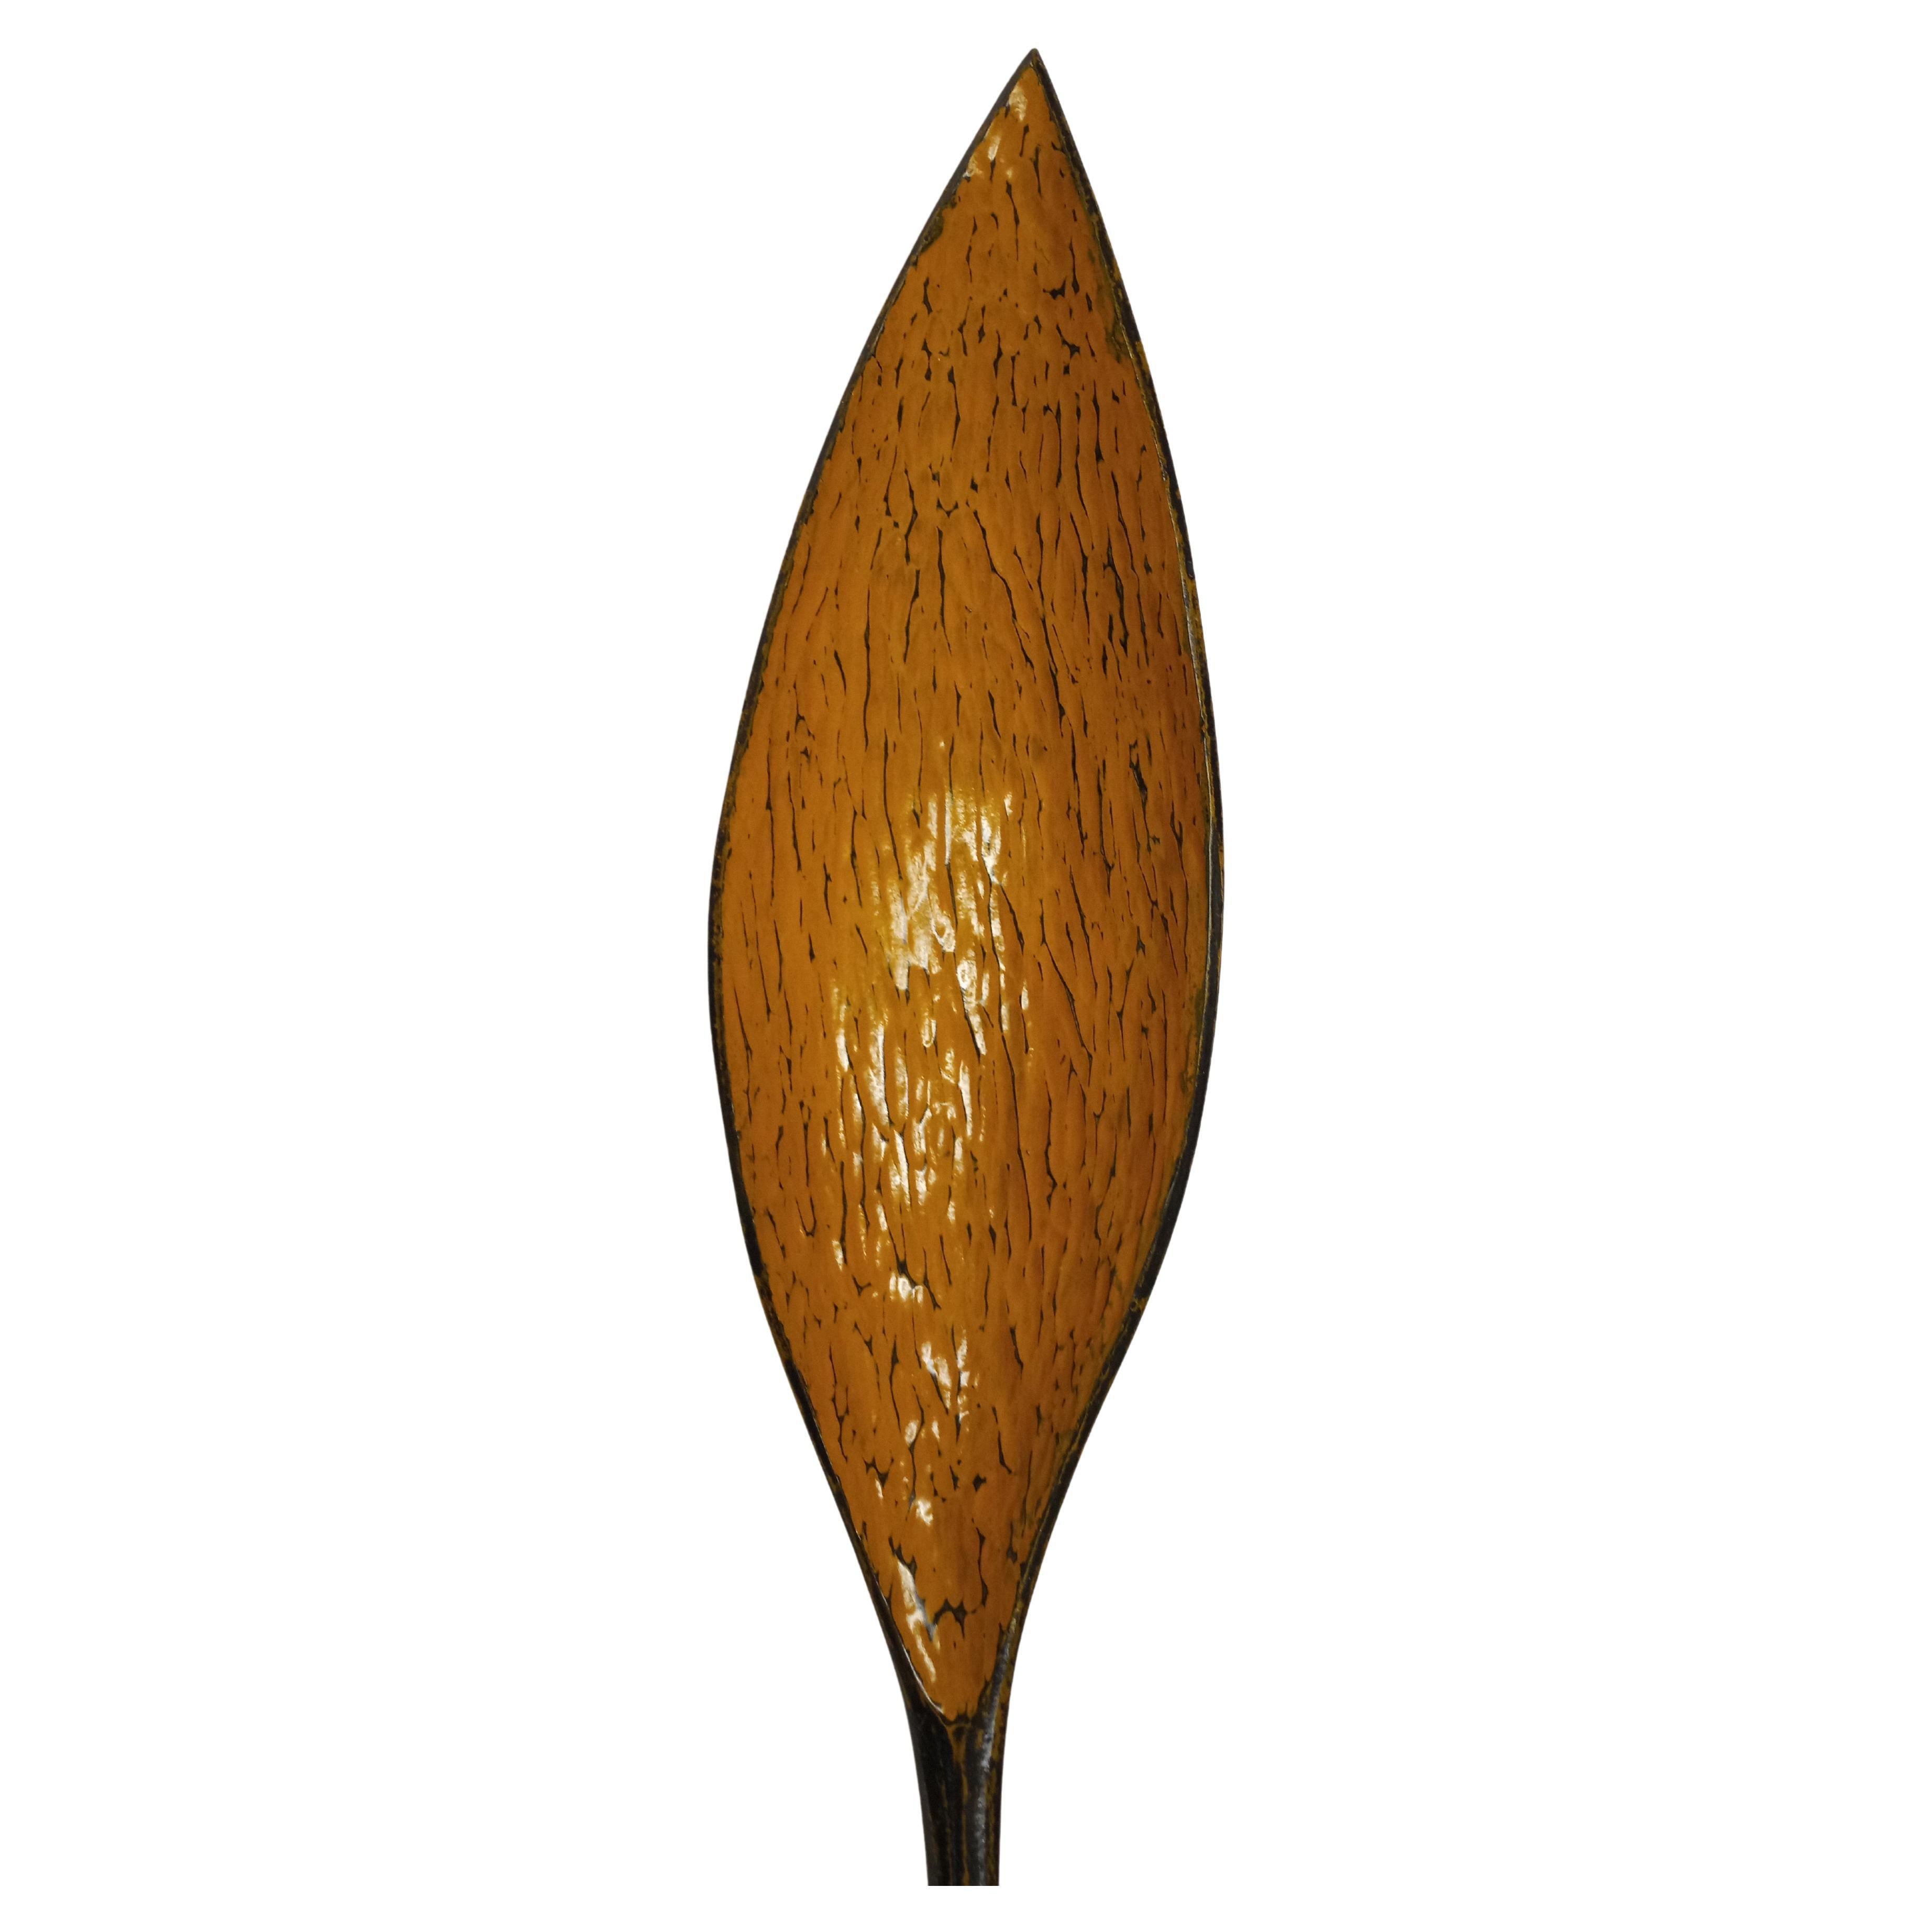 Large curved black and yellow textured spoon sculpture in stock